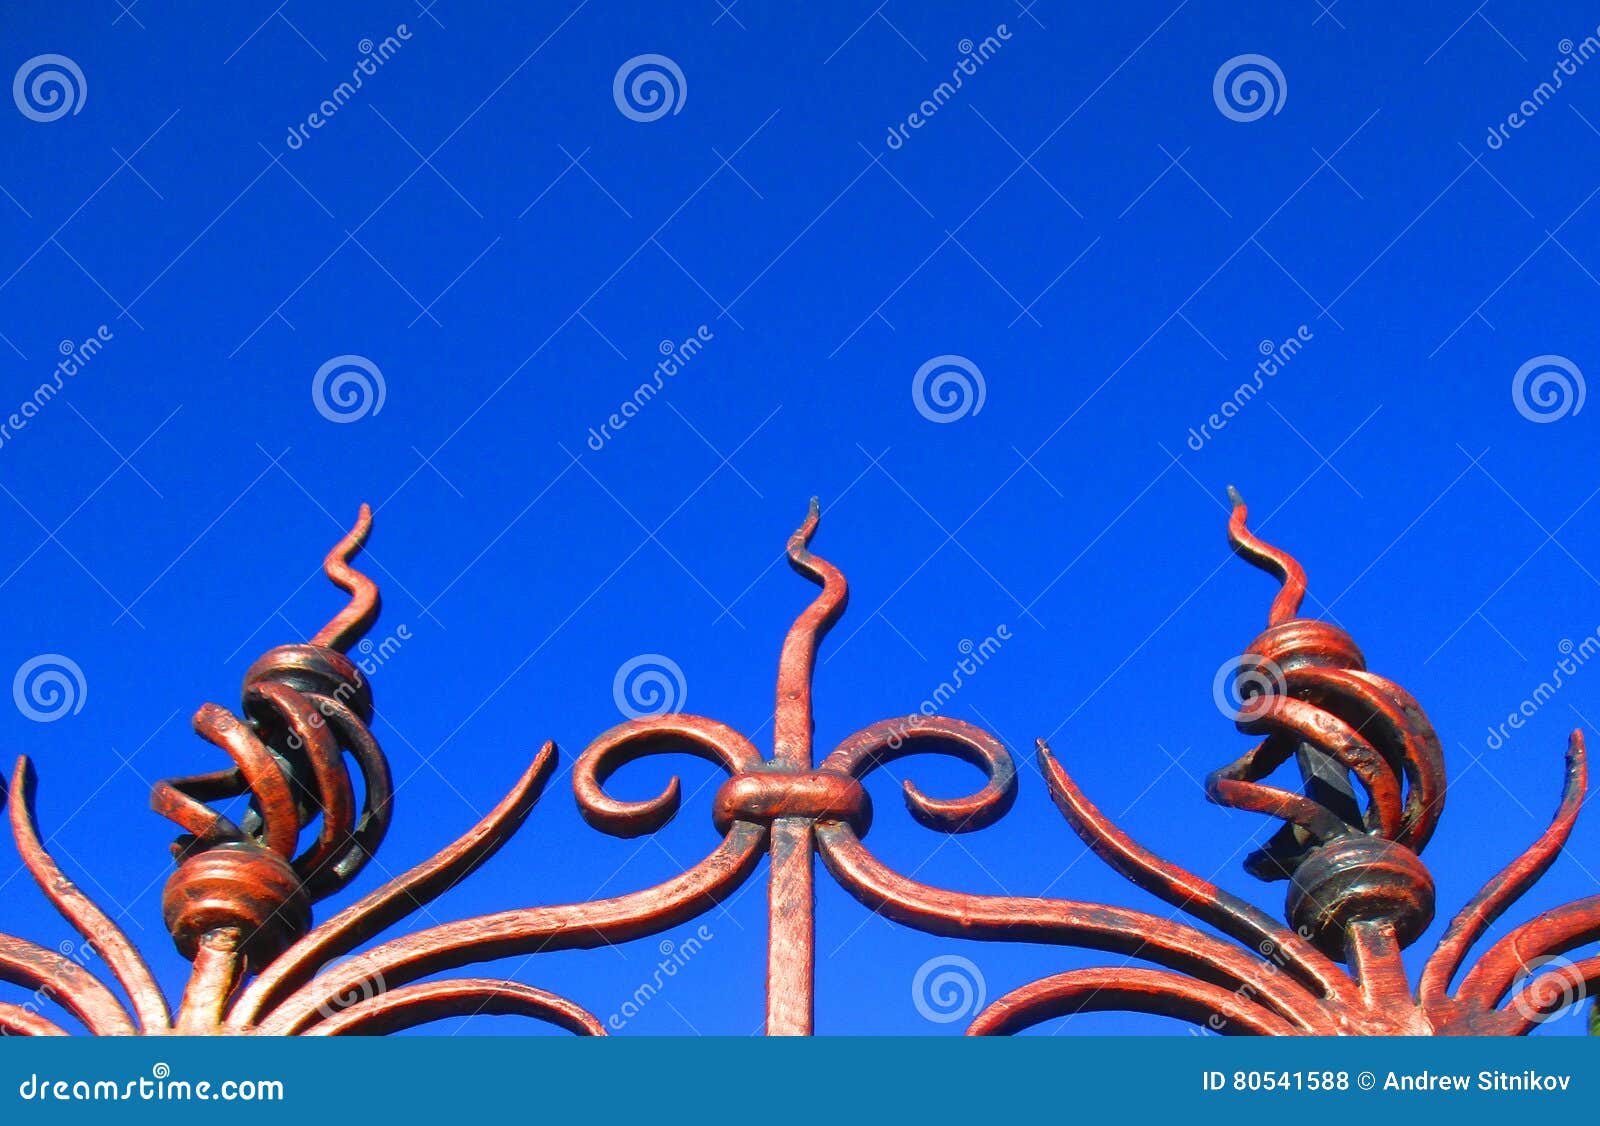 Forged torches stock photo. Image of component, tongue - 80541588